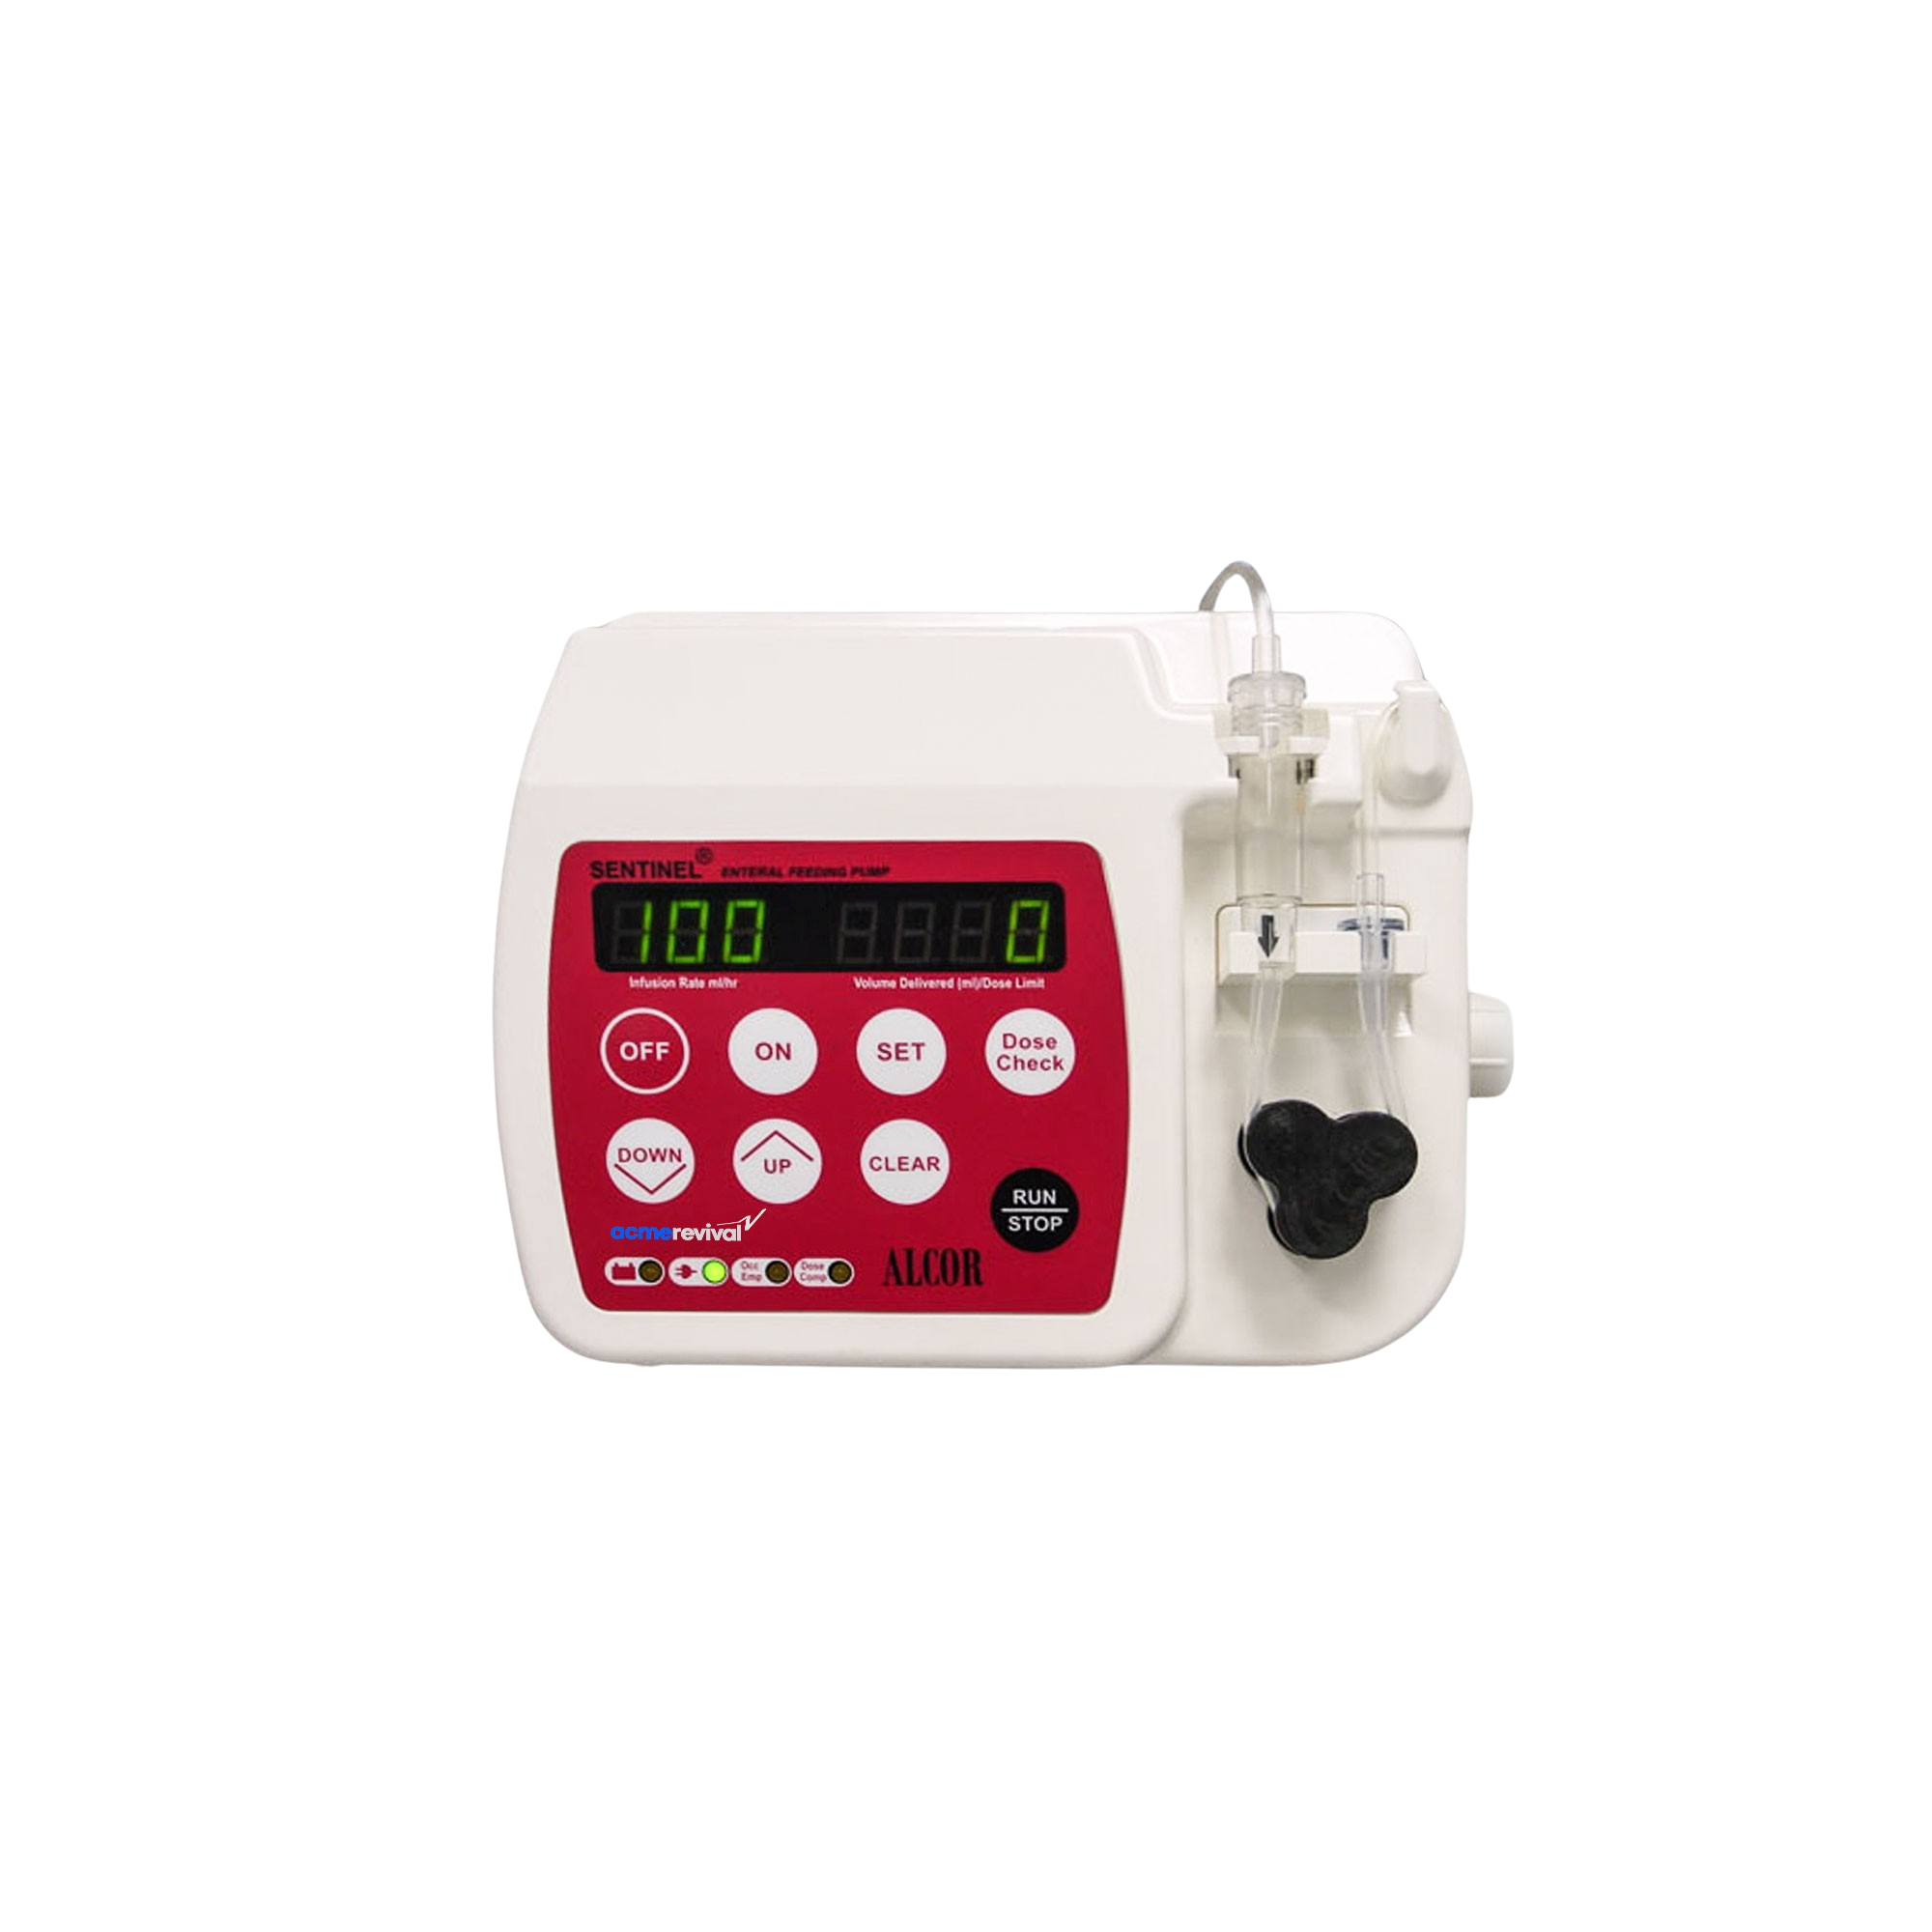 Service, Repair & Parts for your Alcor Sentinel Enteral Feeding Pump